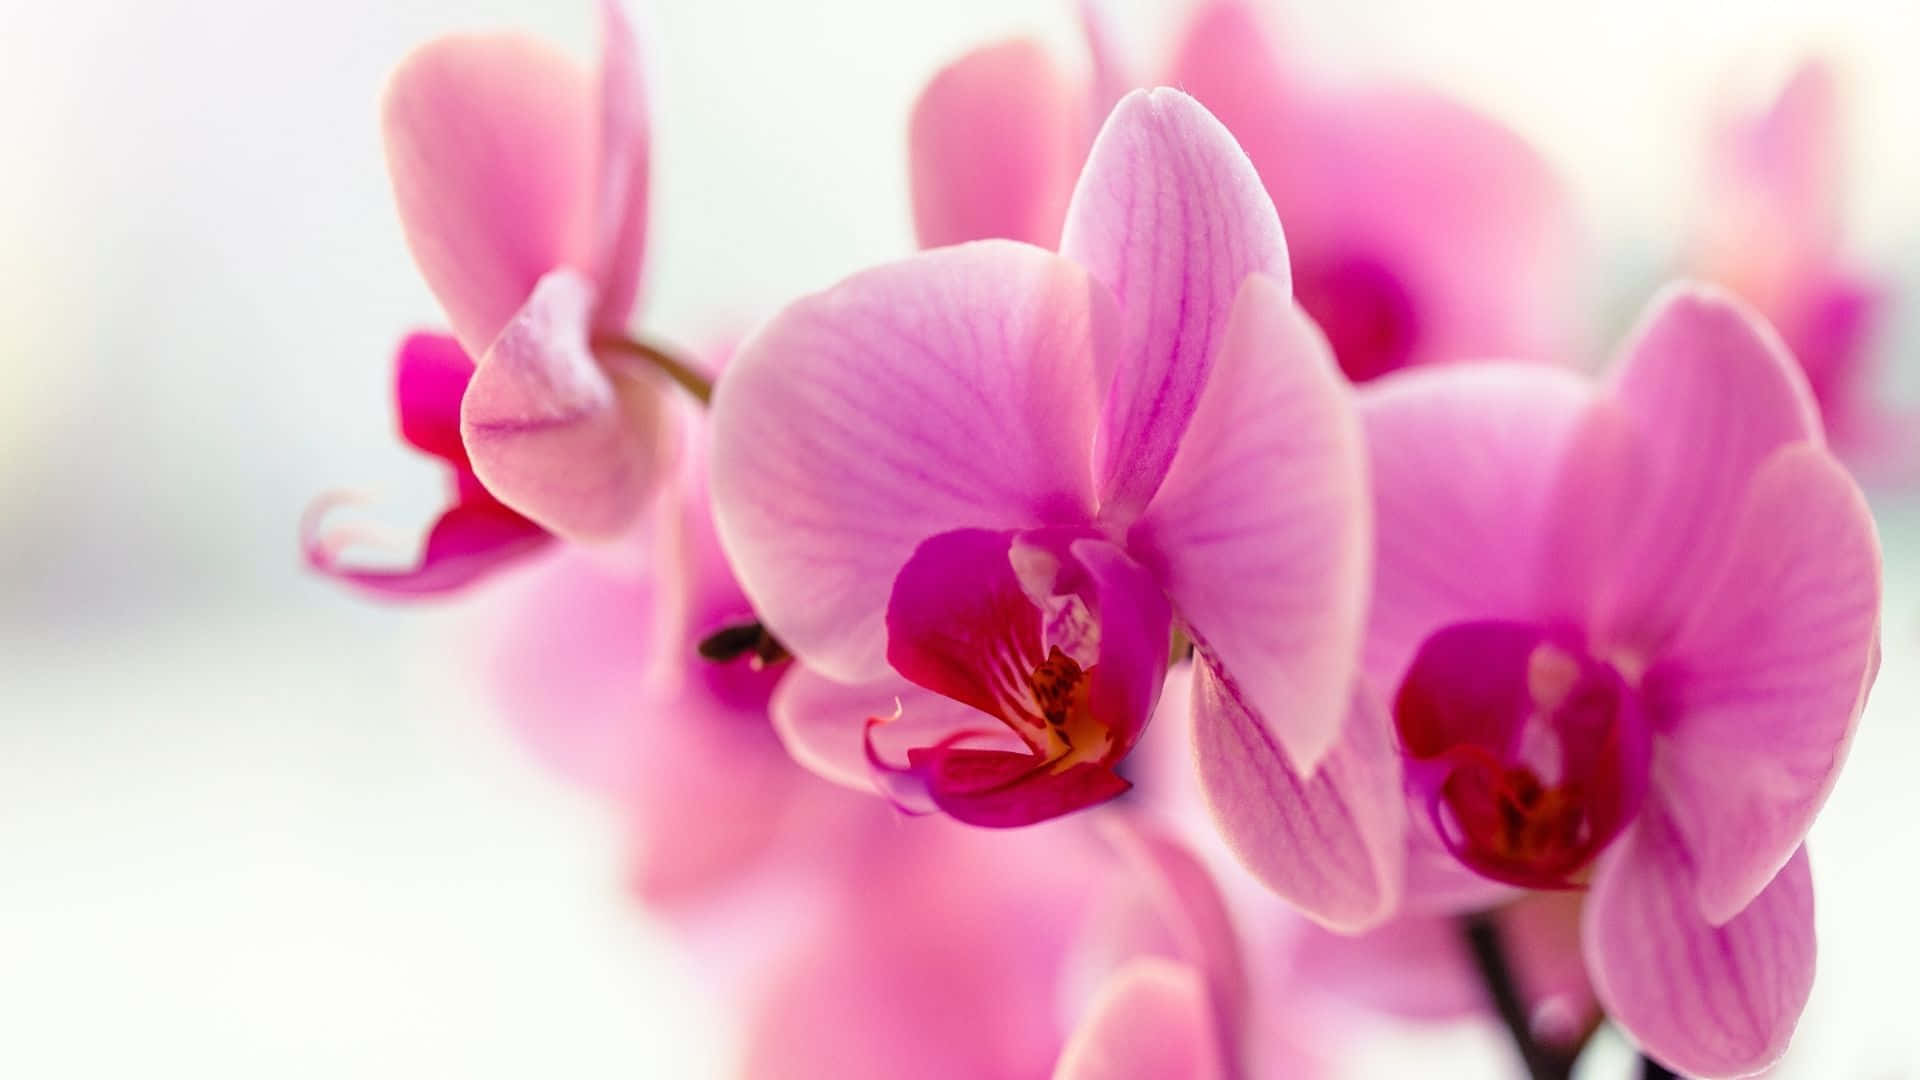 Rare Orchid Beautiful Flowers Pictures